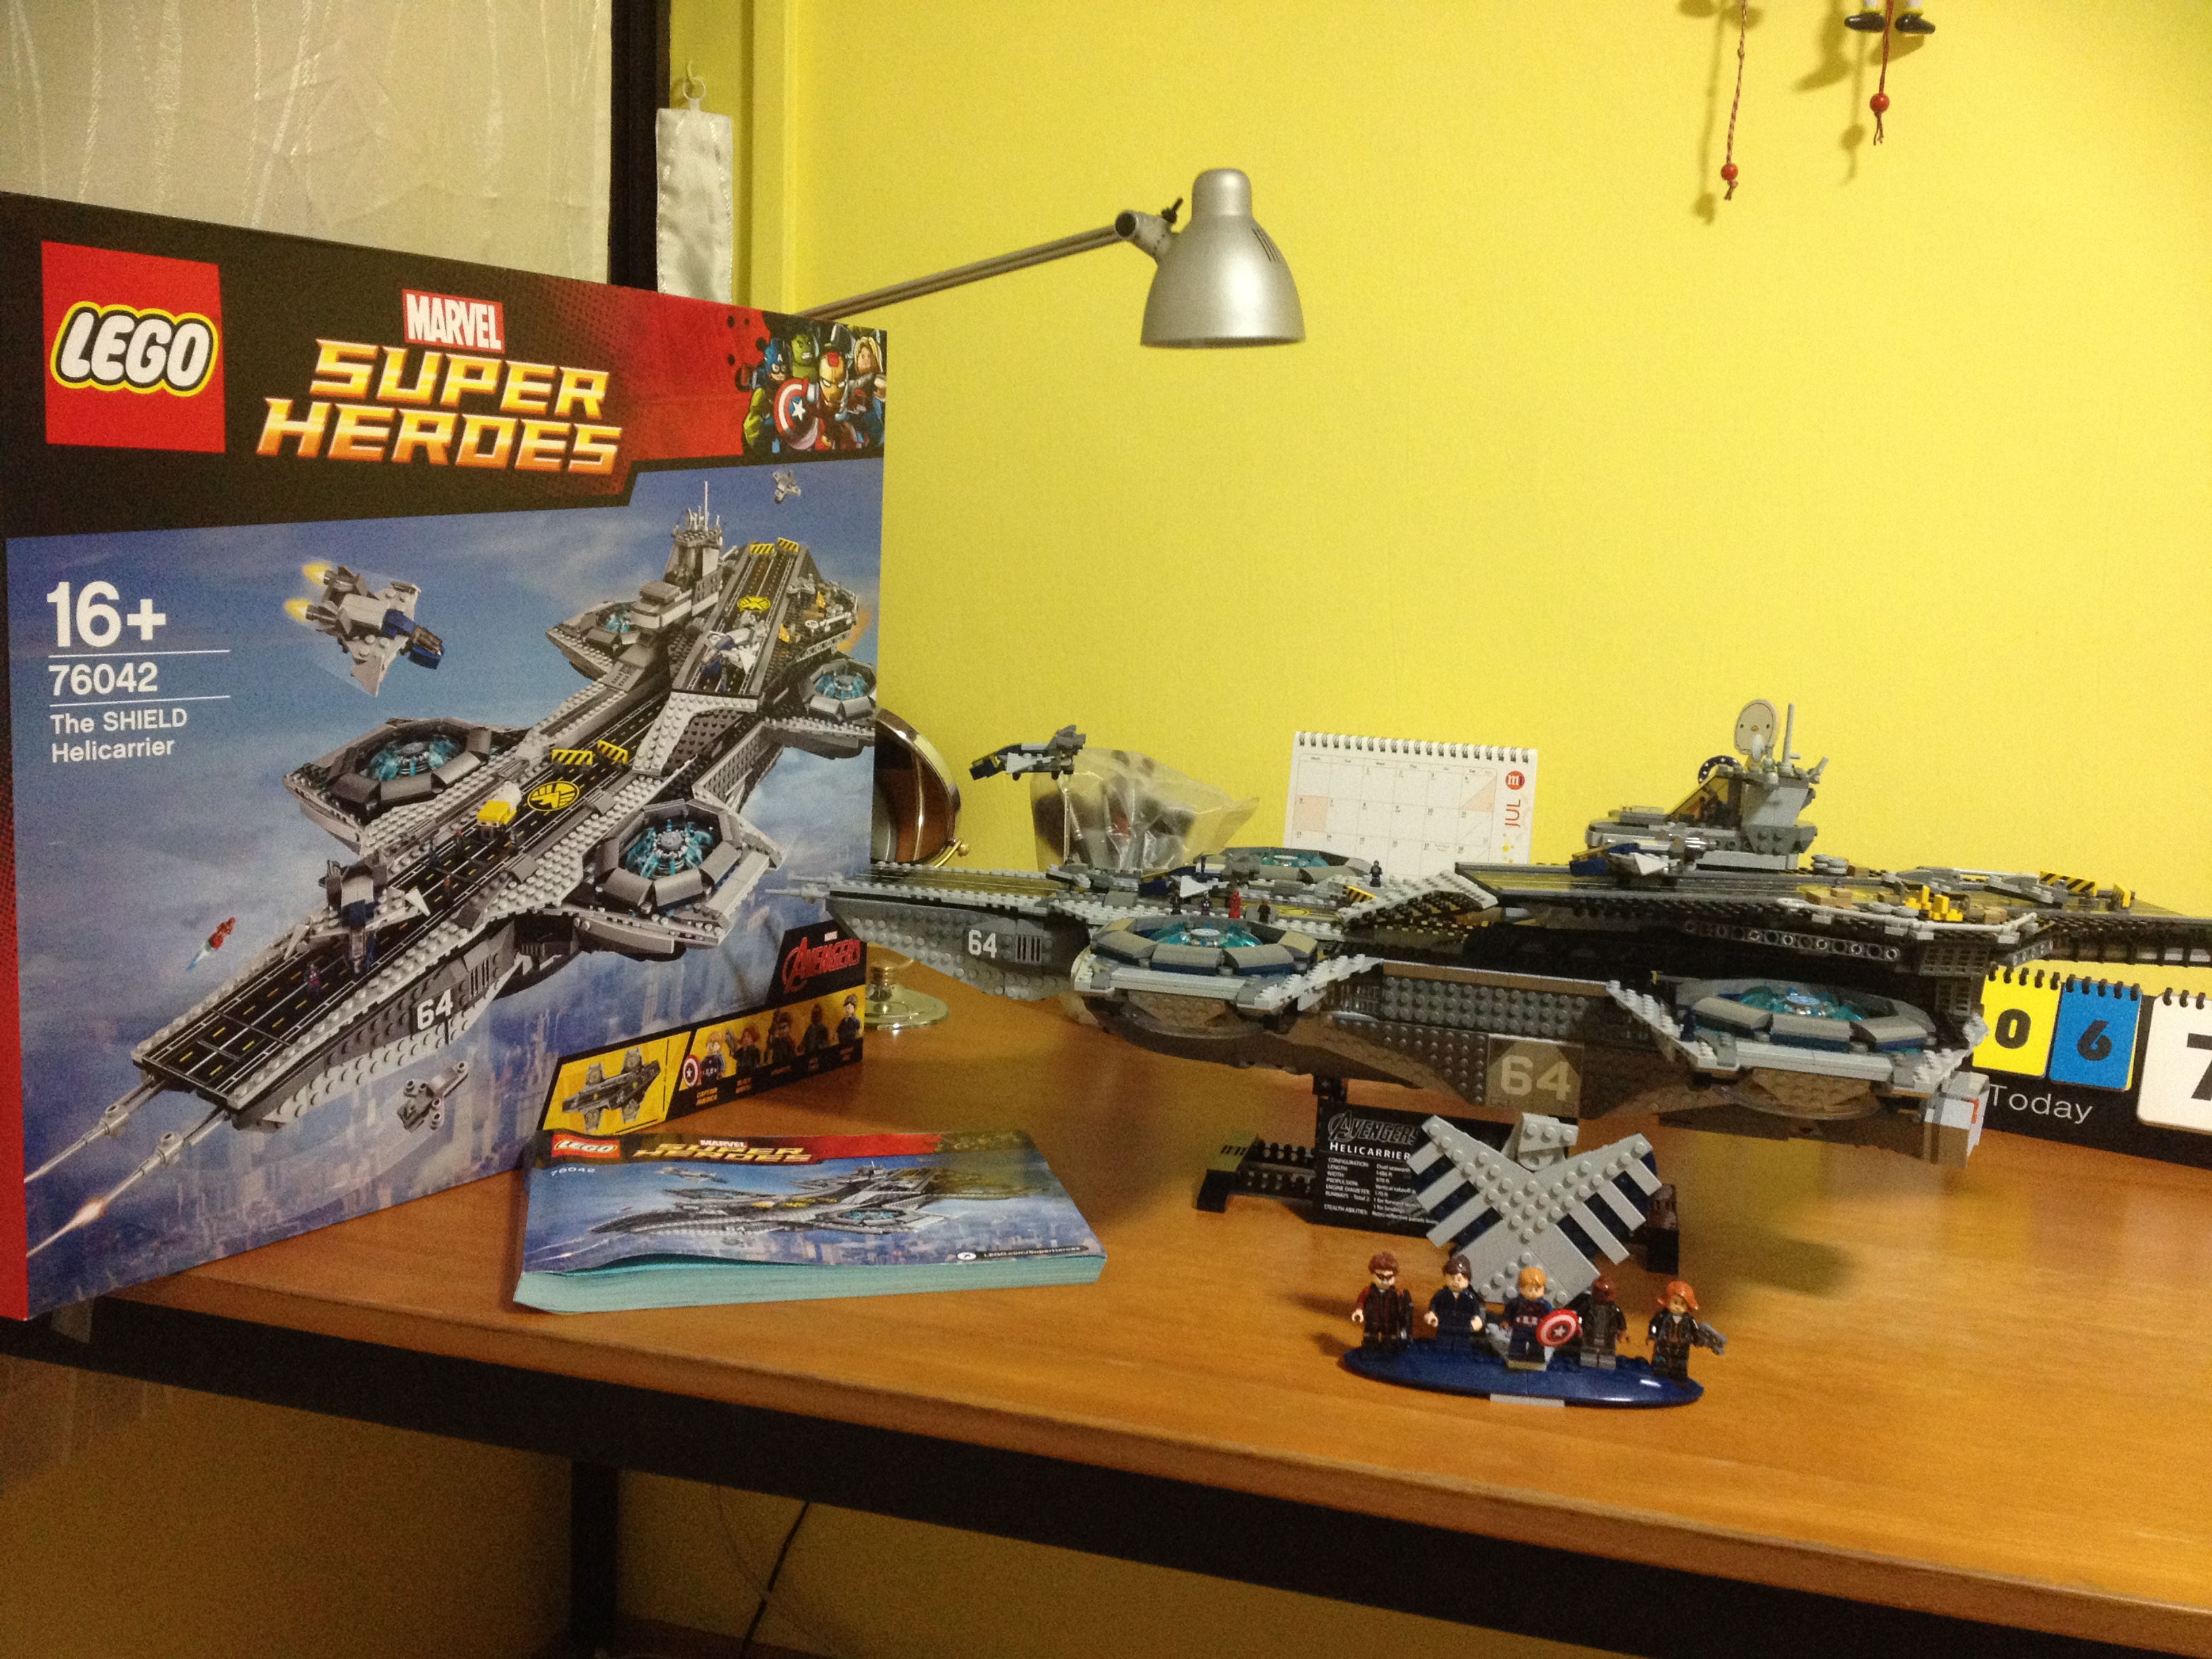 Lego SHIELD Helicarrier finished